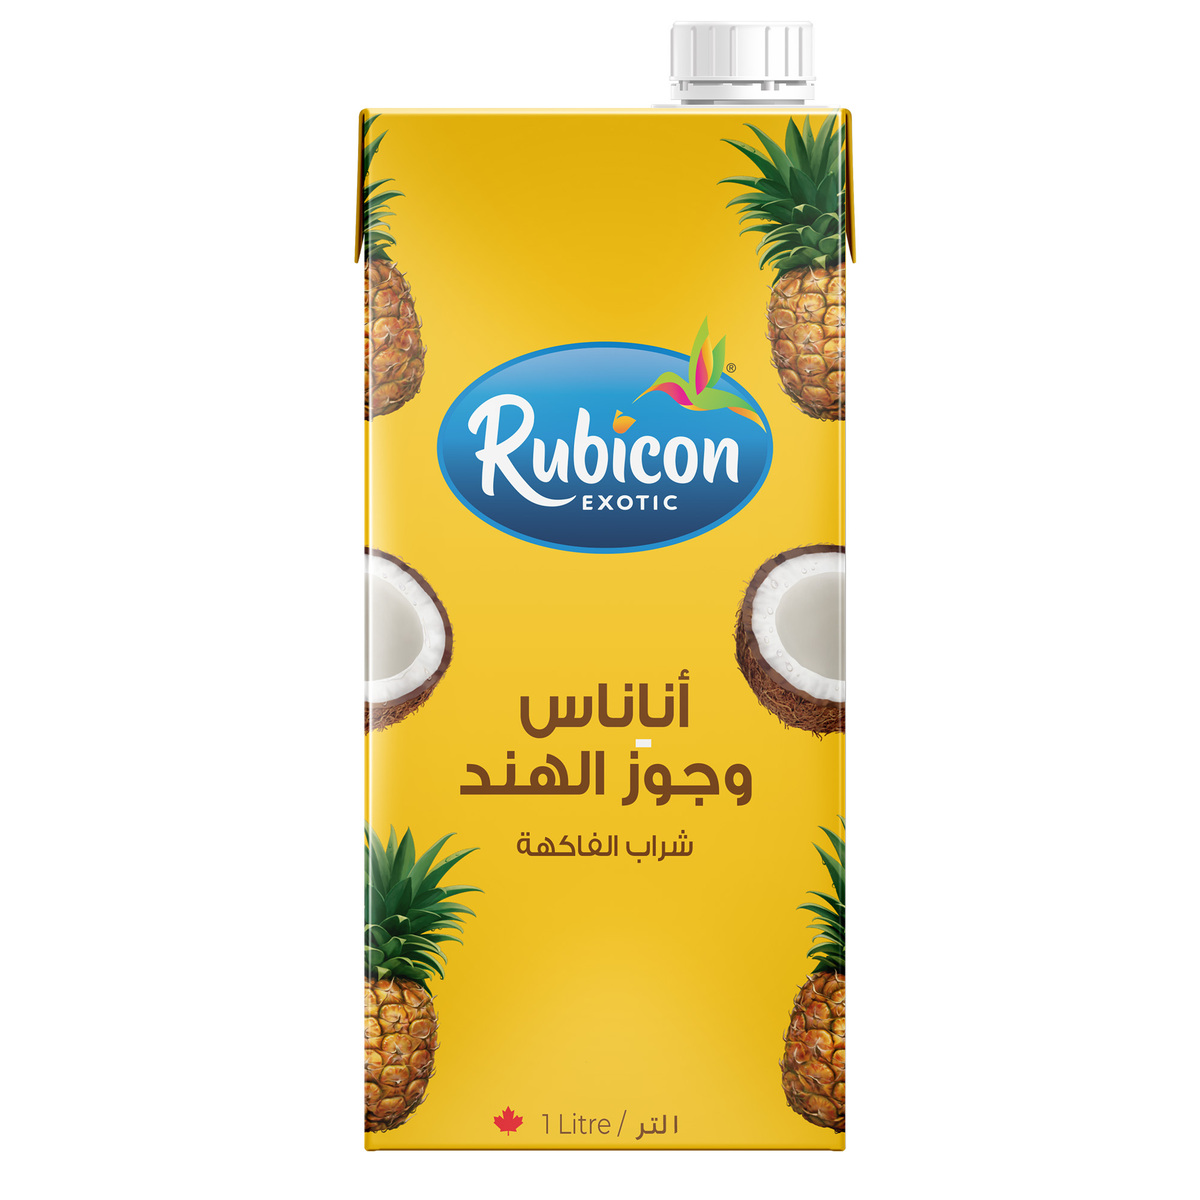 Rubicon Exotic Pineapple & Cocont Fruit Drink 1 Litre